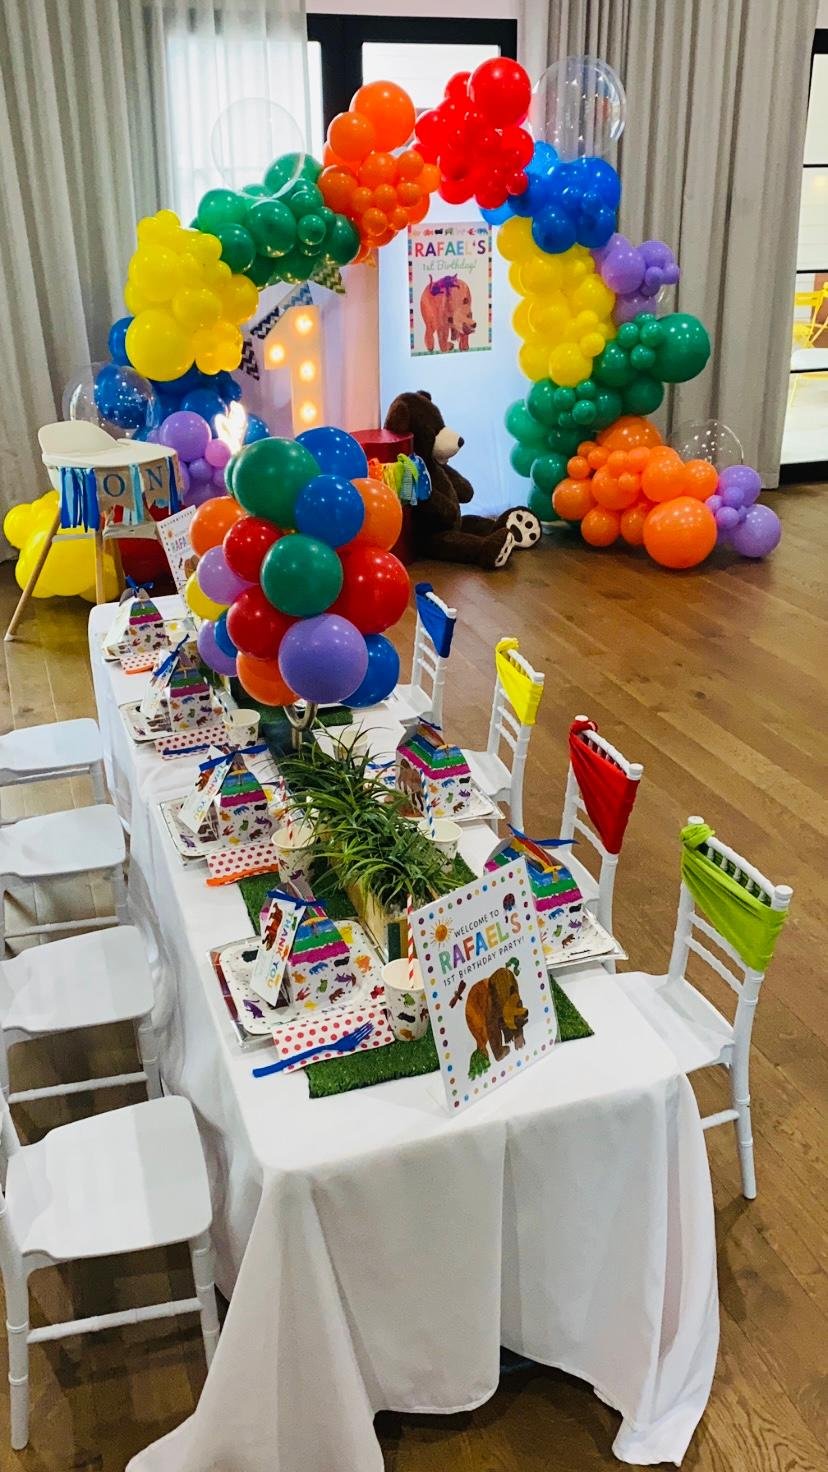 houston kids birthday party balloons and decorations event planner ideas 3.jpg